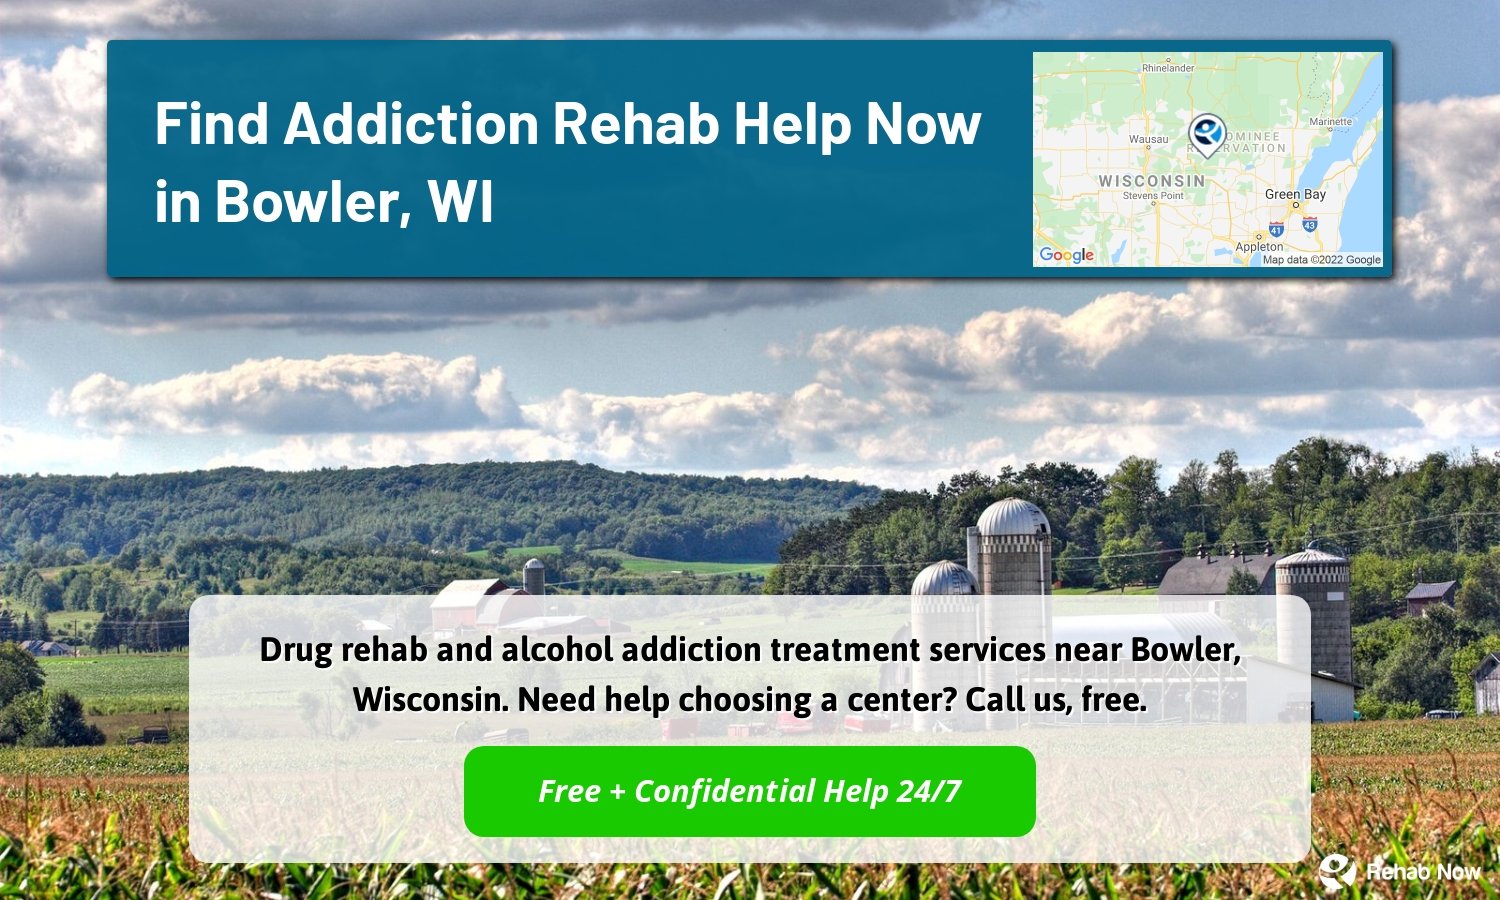 Drug rehab and alcohol addiction treatment services near Bowler, Wisconsin. Need help choosing a center? Call us, free.